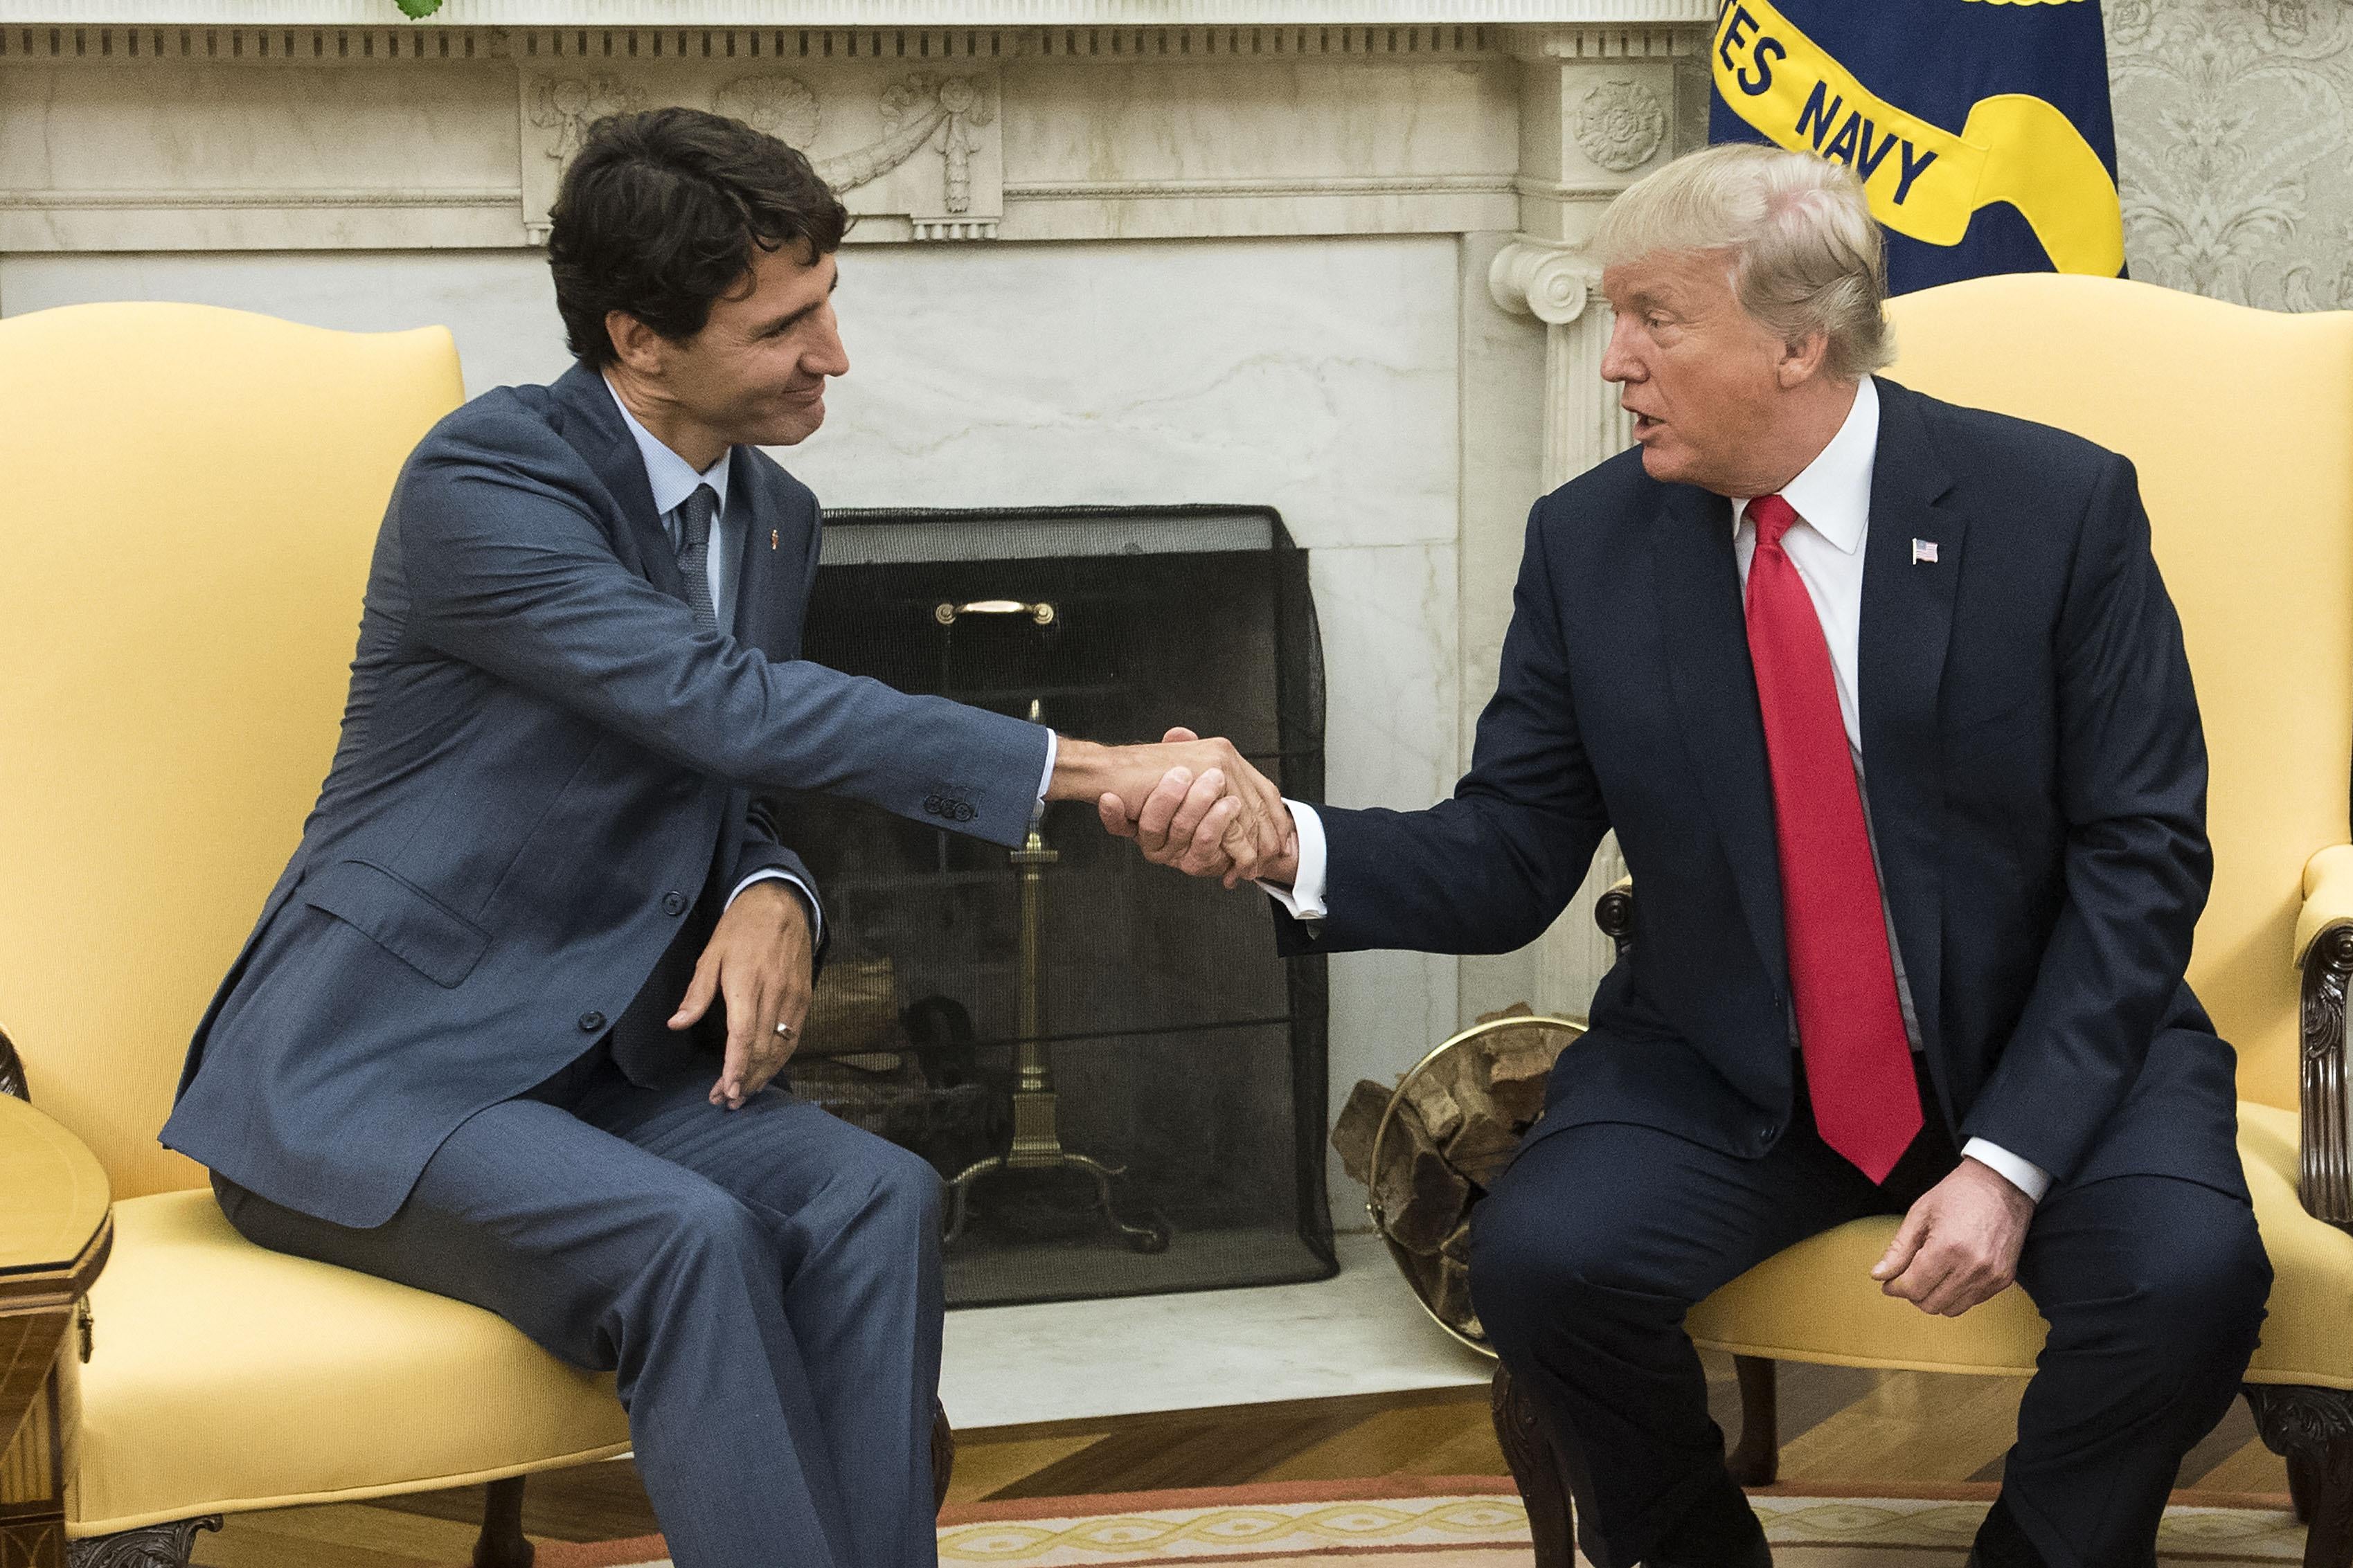 WASHINGTON, DC - OCTOBER 11: (AFP OUT) U.S. President Donald Trump shakes hands with Canadian Prime Minister Justin Trudeau during a meeting in the Oval Office at the White House on October 11, 2017 in Washington, DC. (Photo by Kevin Dietsch - Pool/Getty Images)